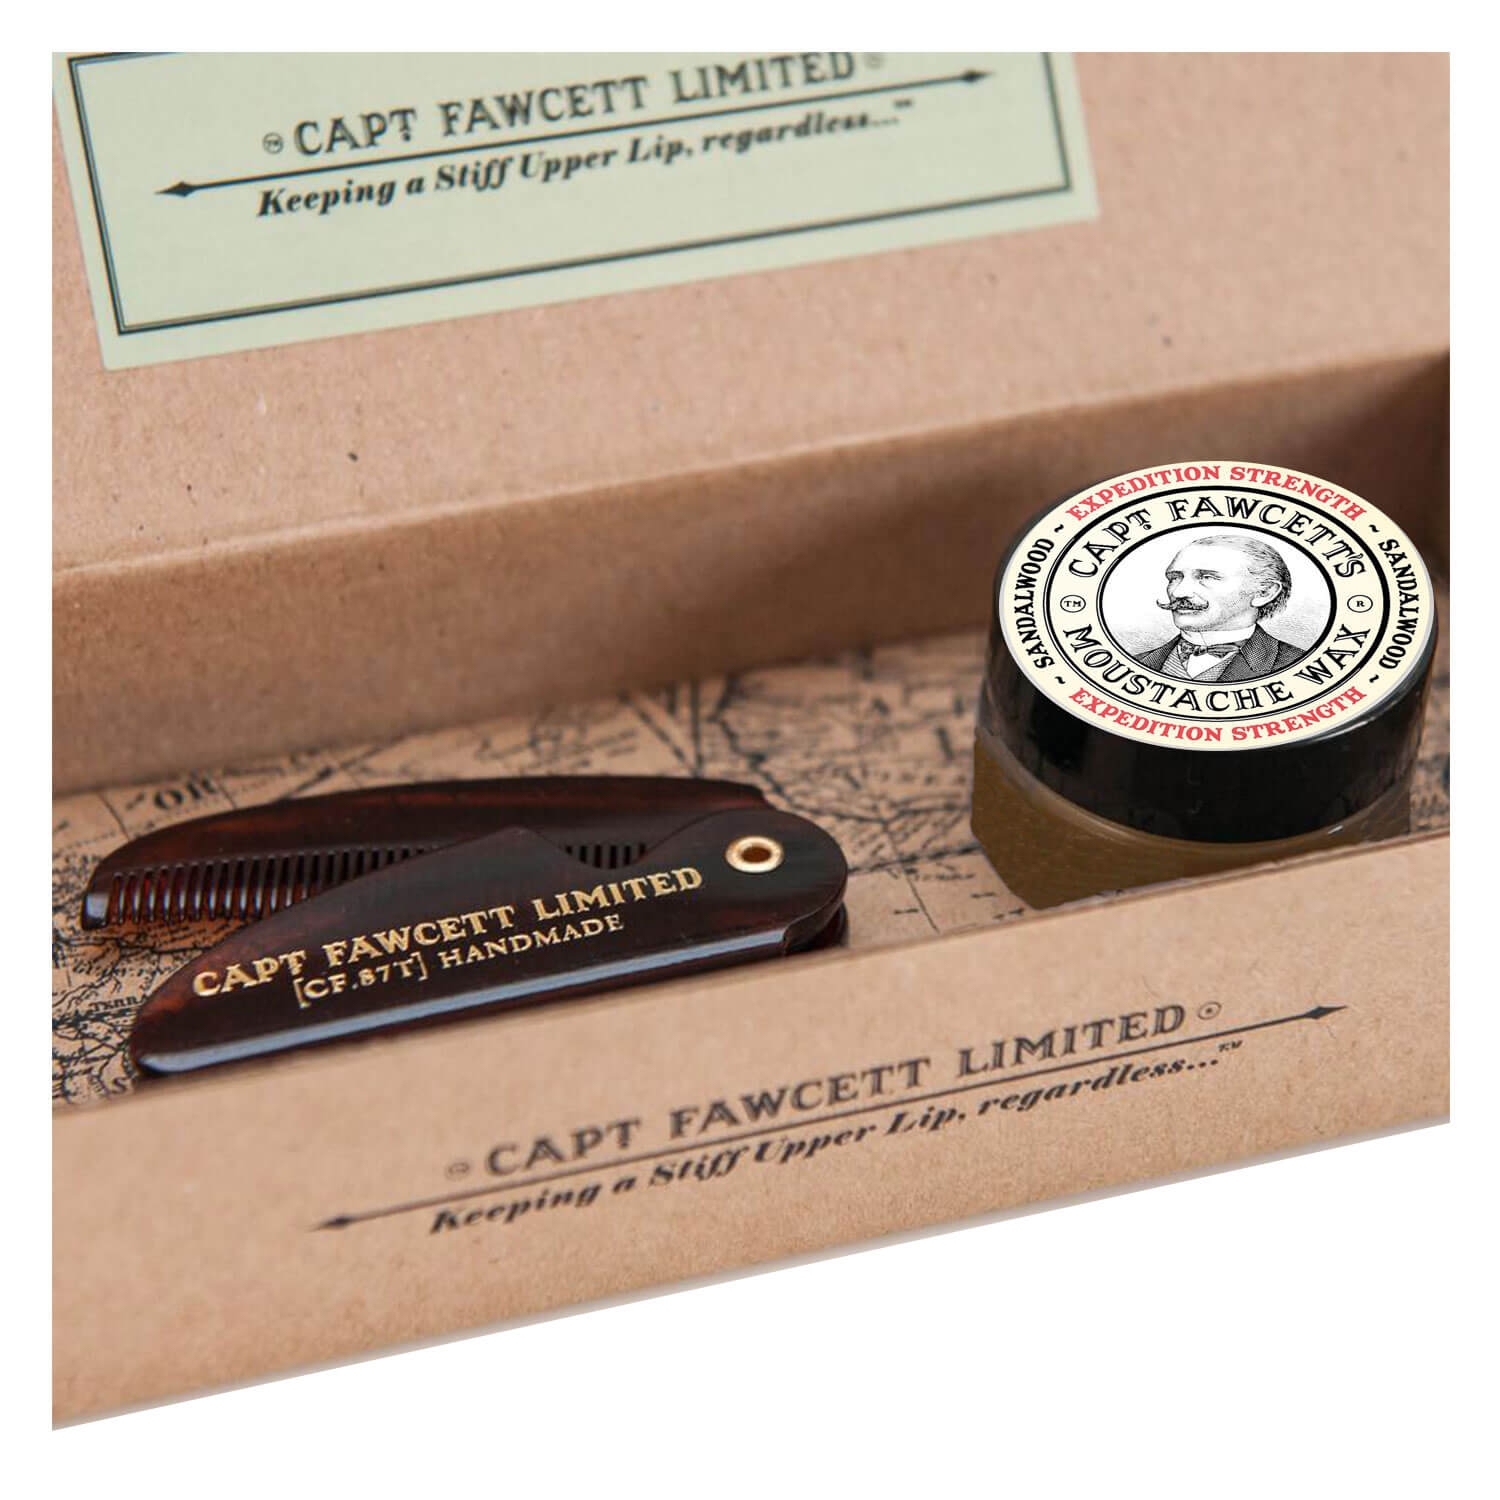 Product image from Capt. Fawcett Care - Expedition Strength Moustache Wax & Folding Pocket Moustache Comb Kit